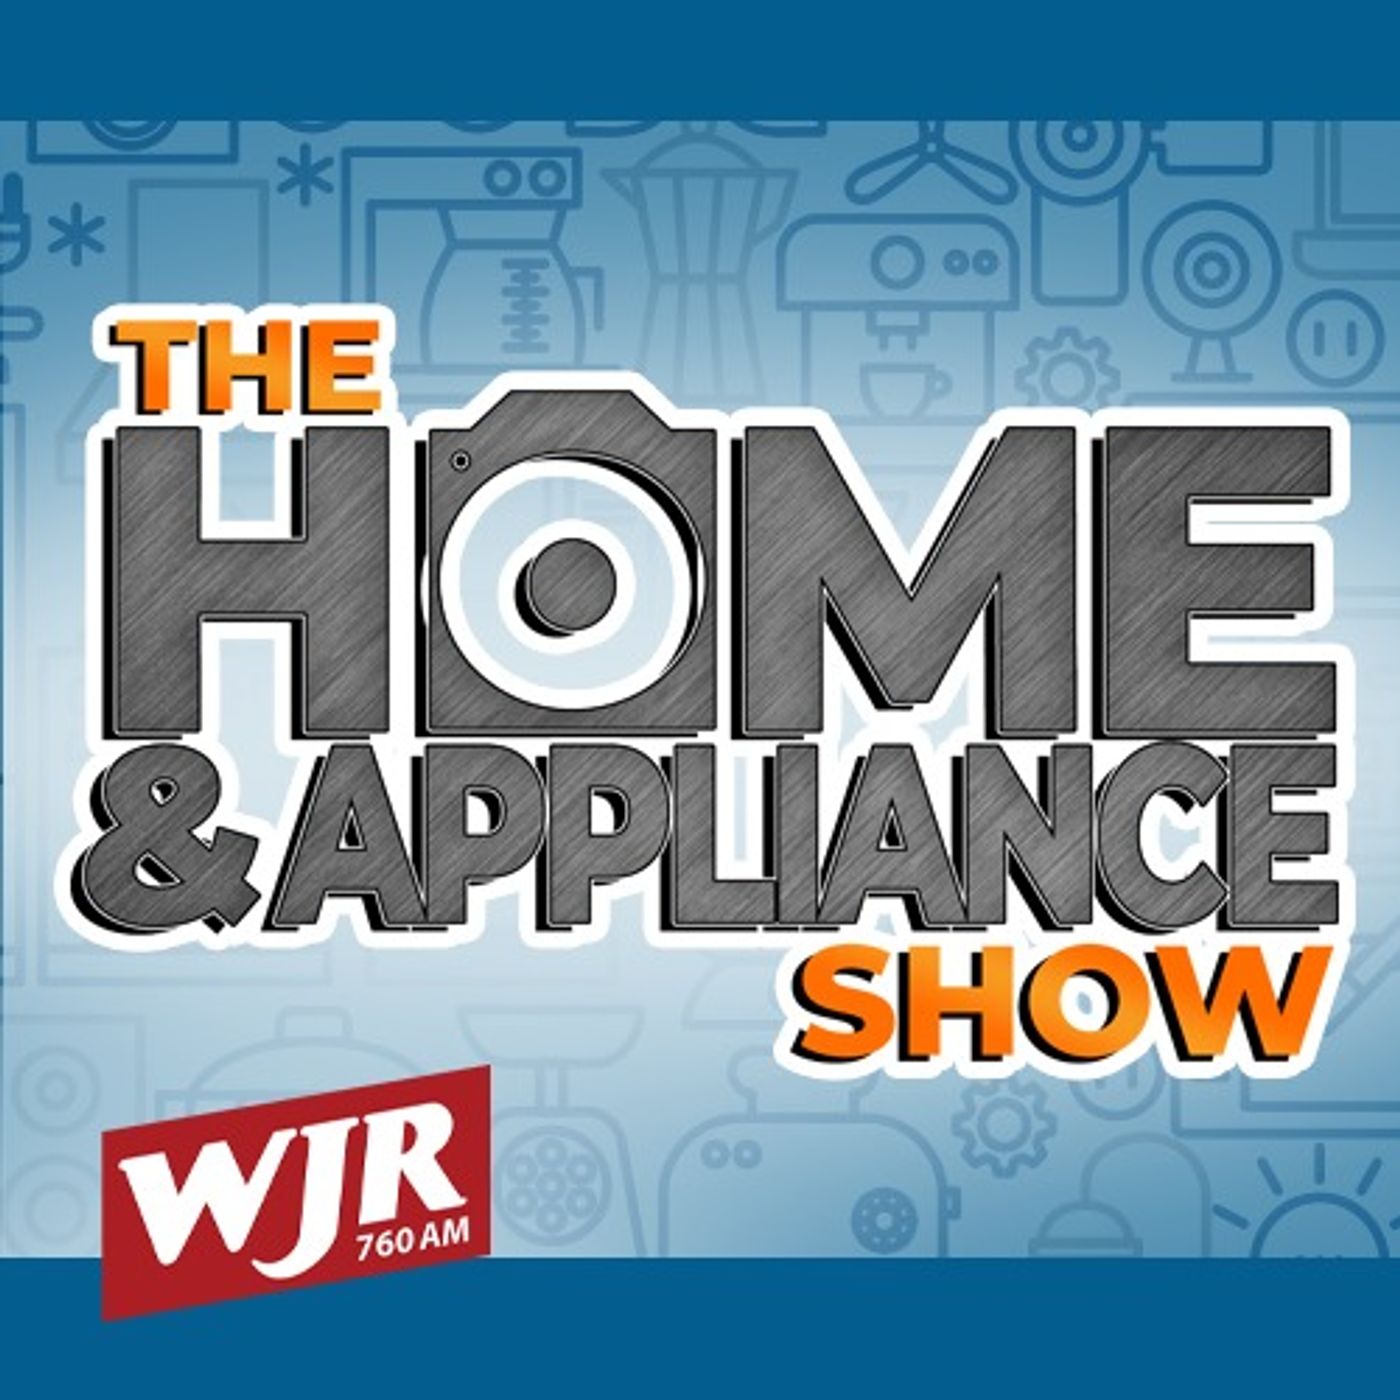 The Home and Appliance Show 